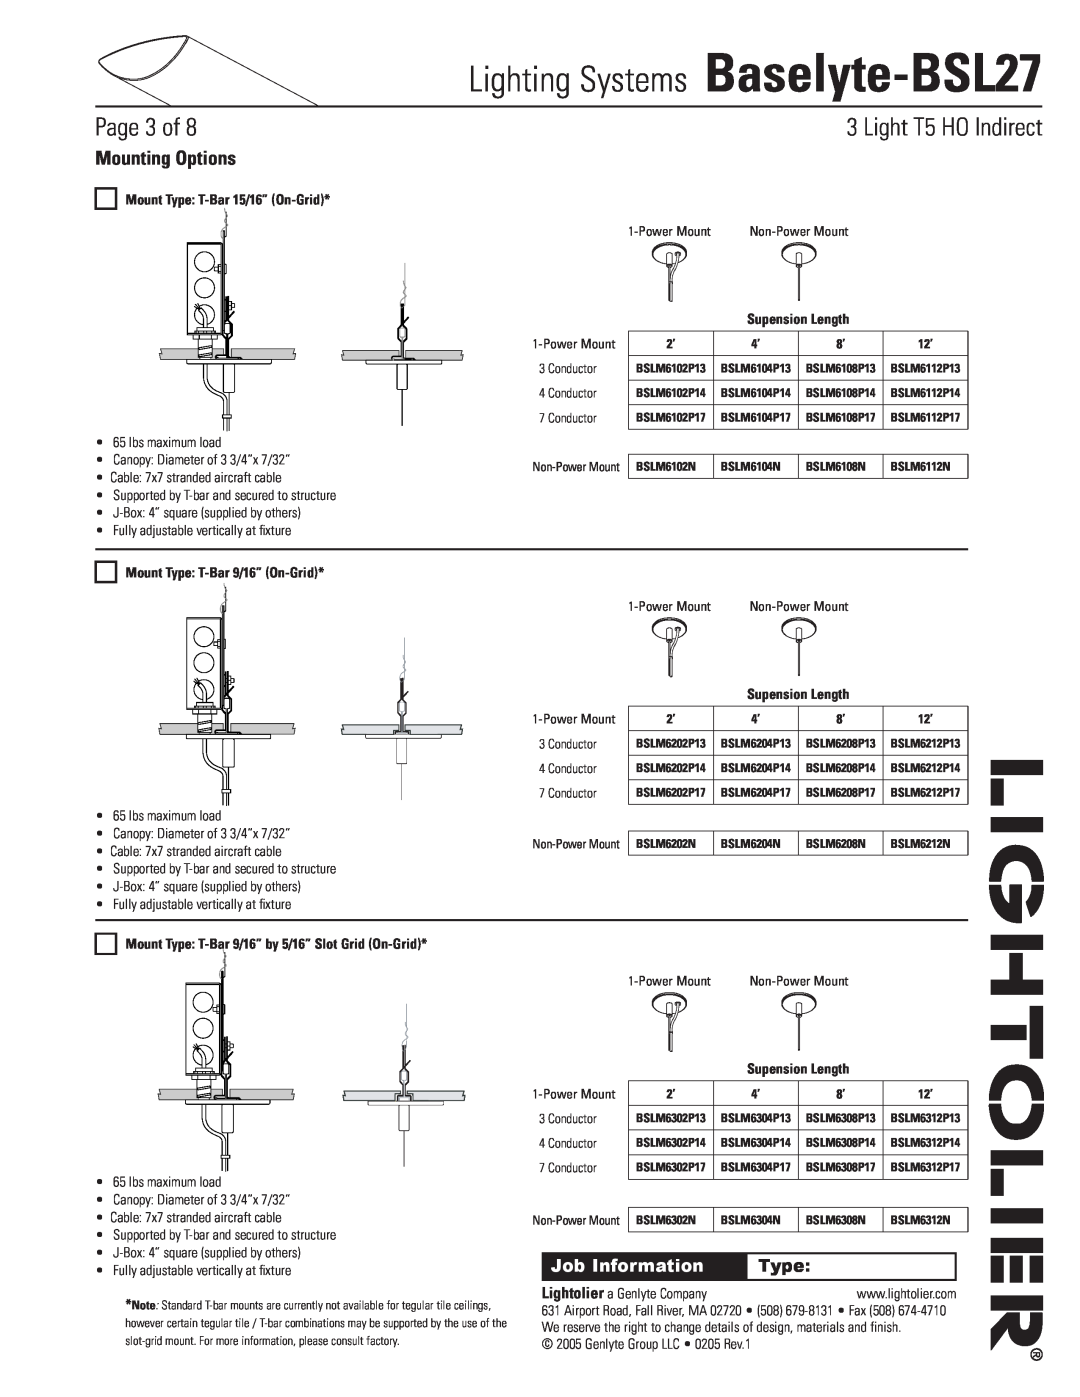 Lightolier Baselyte-BSL27 Mounting Options, Mount Type T-Bar15/16” On-Grid, Supension Length, Page of, Job Information 